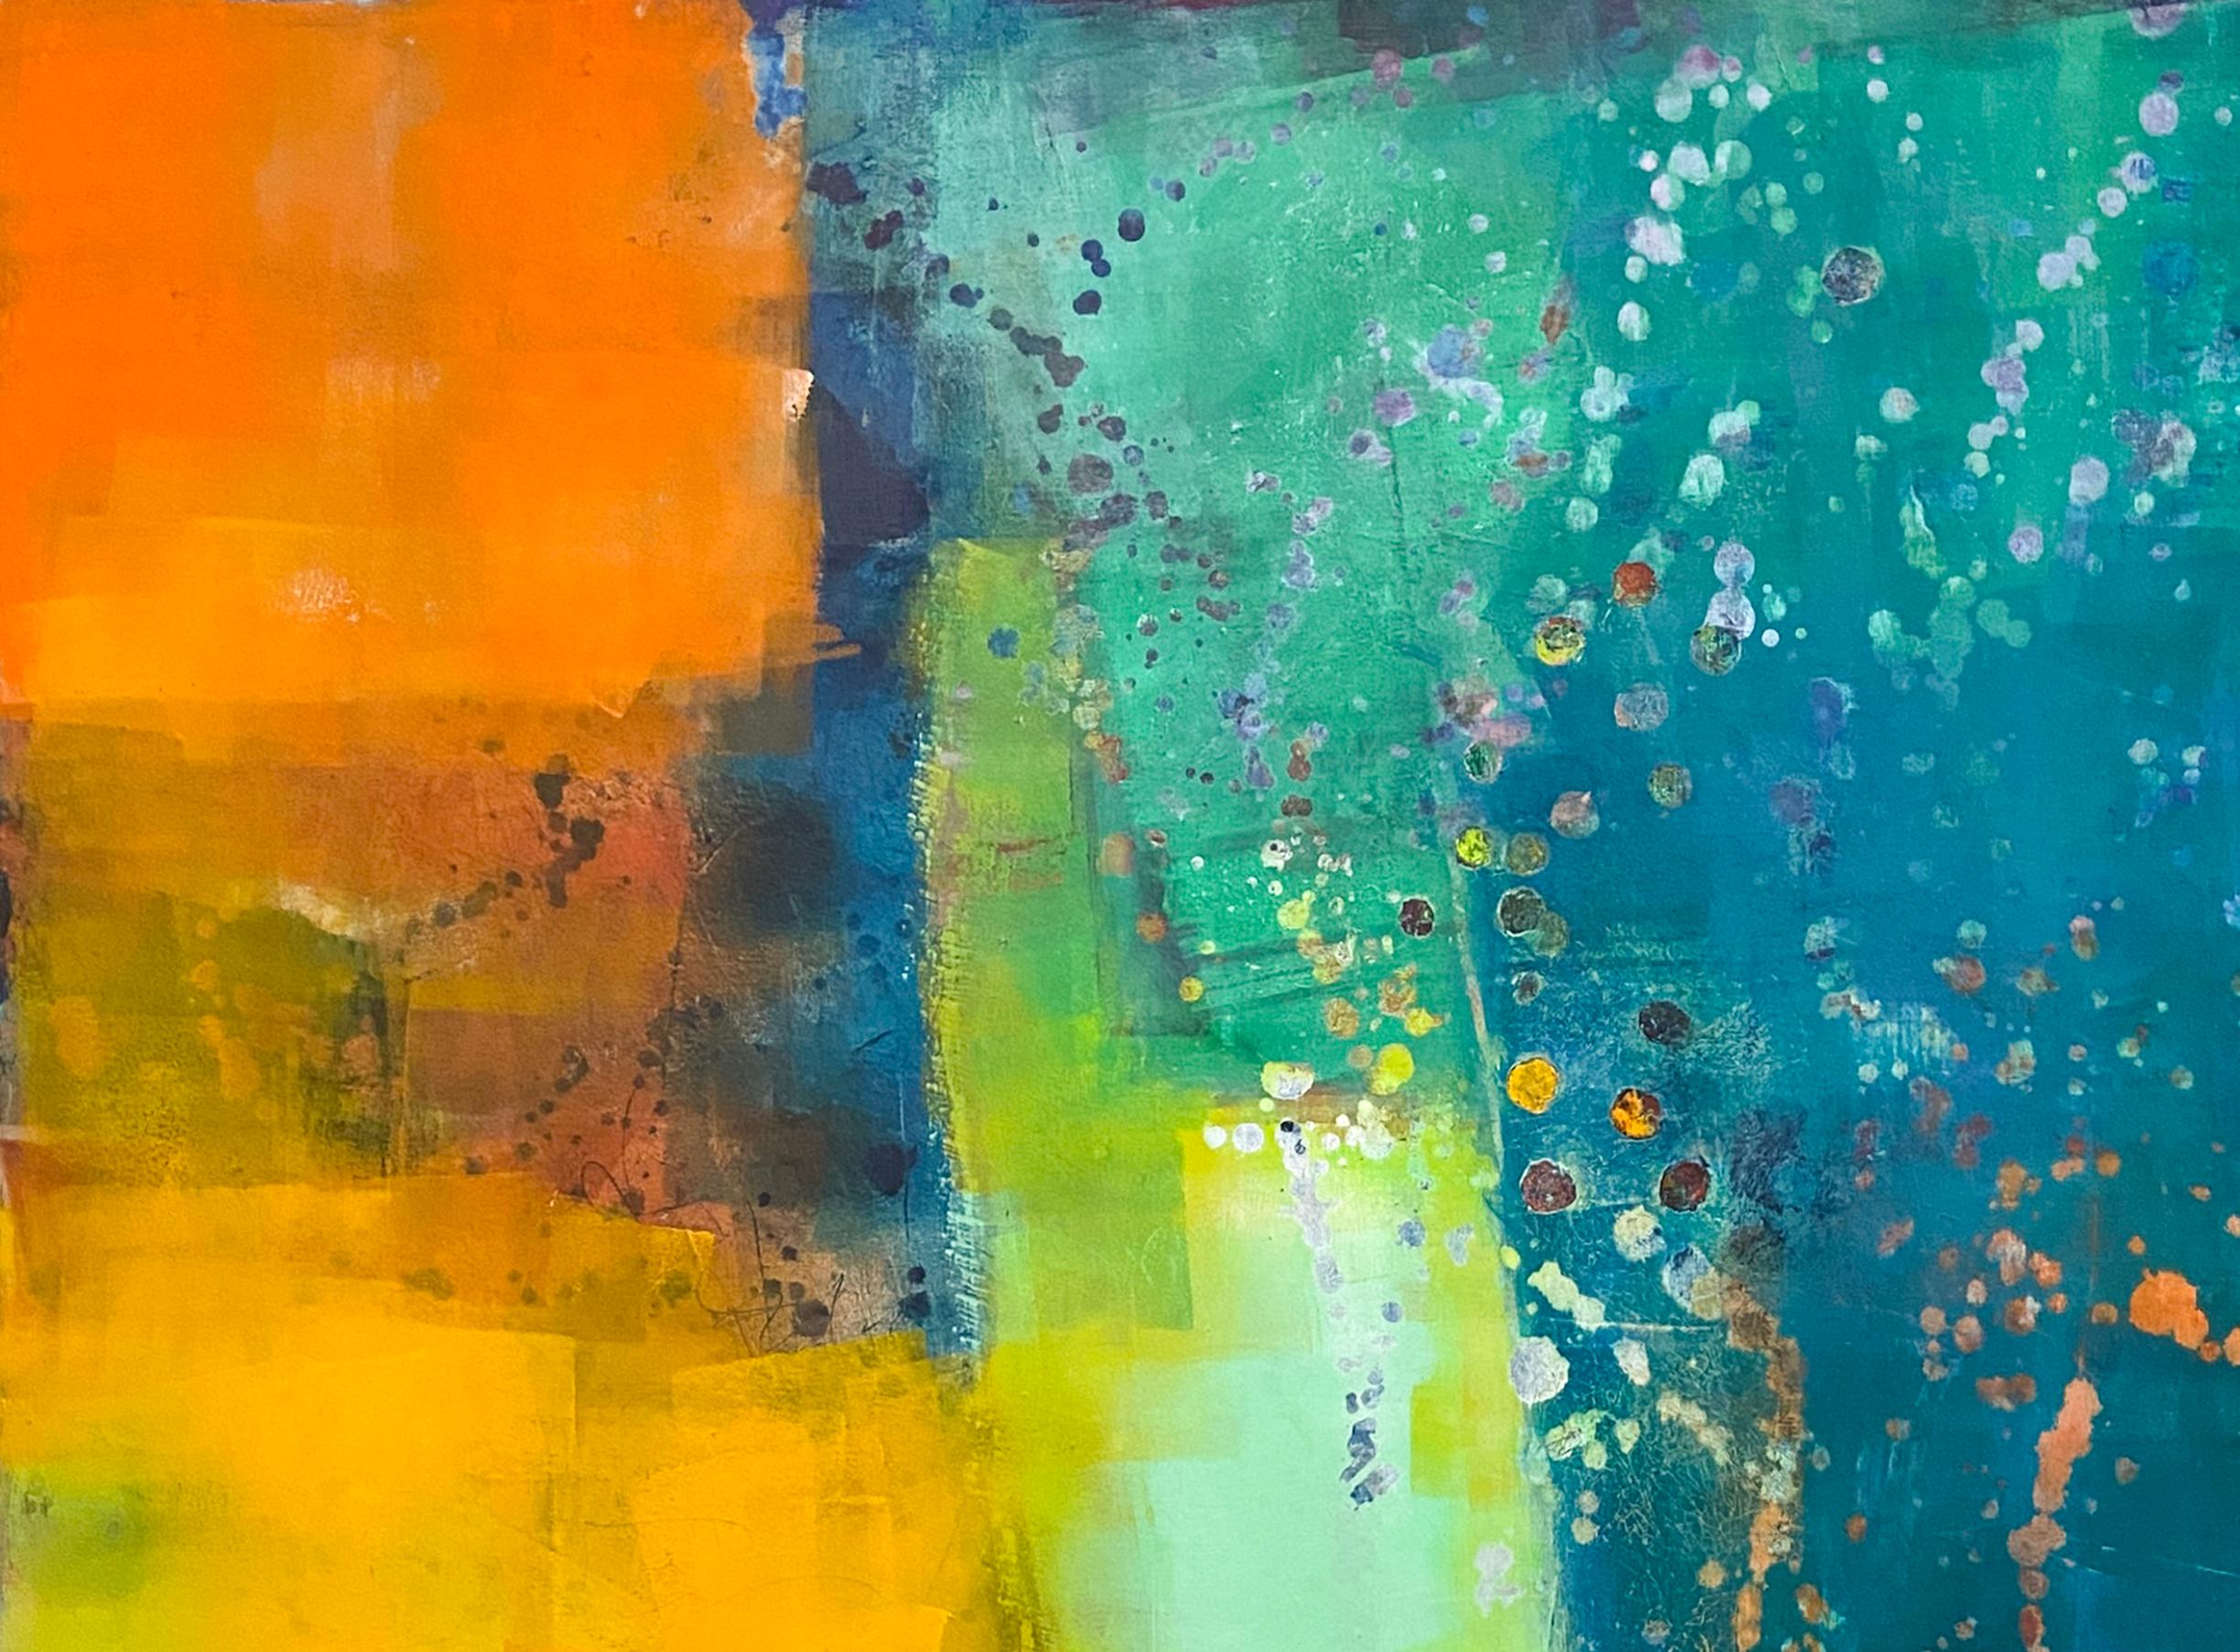 Vicissitudes, Original Contemporary Blue Orange and Yellow Abstract Painting
42